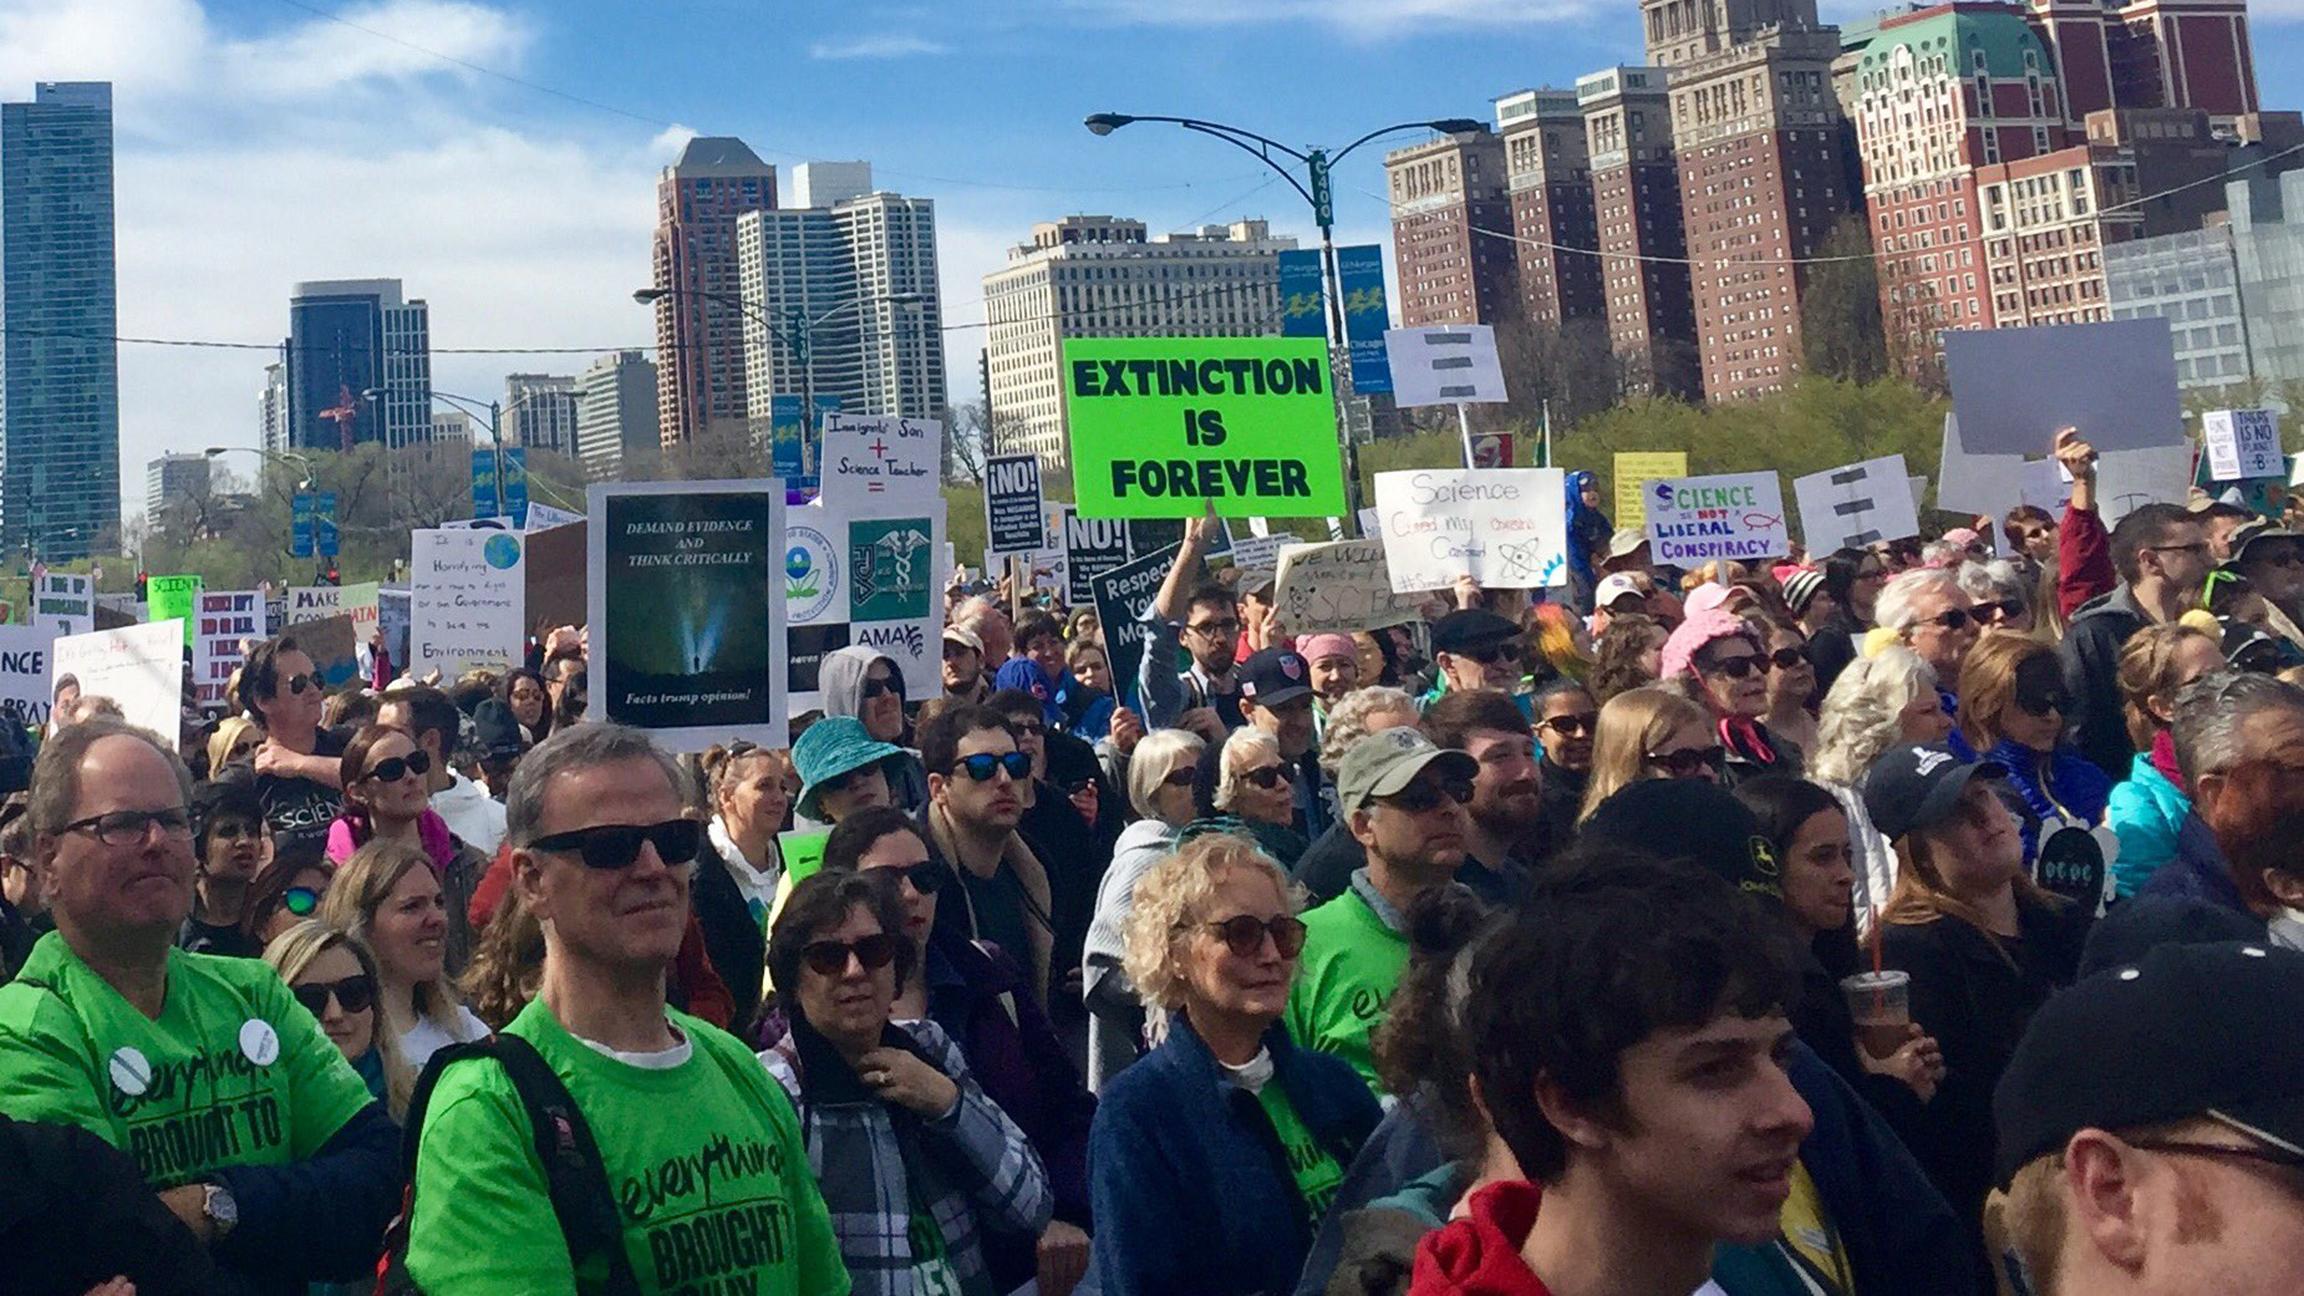 March for Science Chicago organizers said 60,000 people attended the April 22 event. (Susan Wigodner / Twitter)